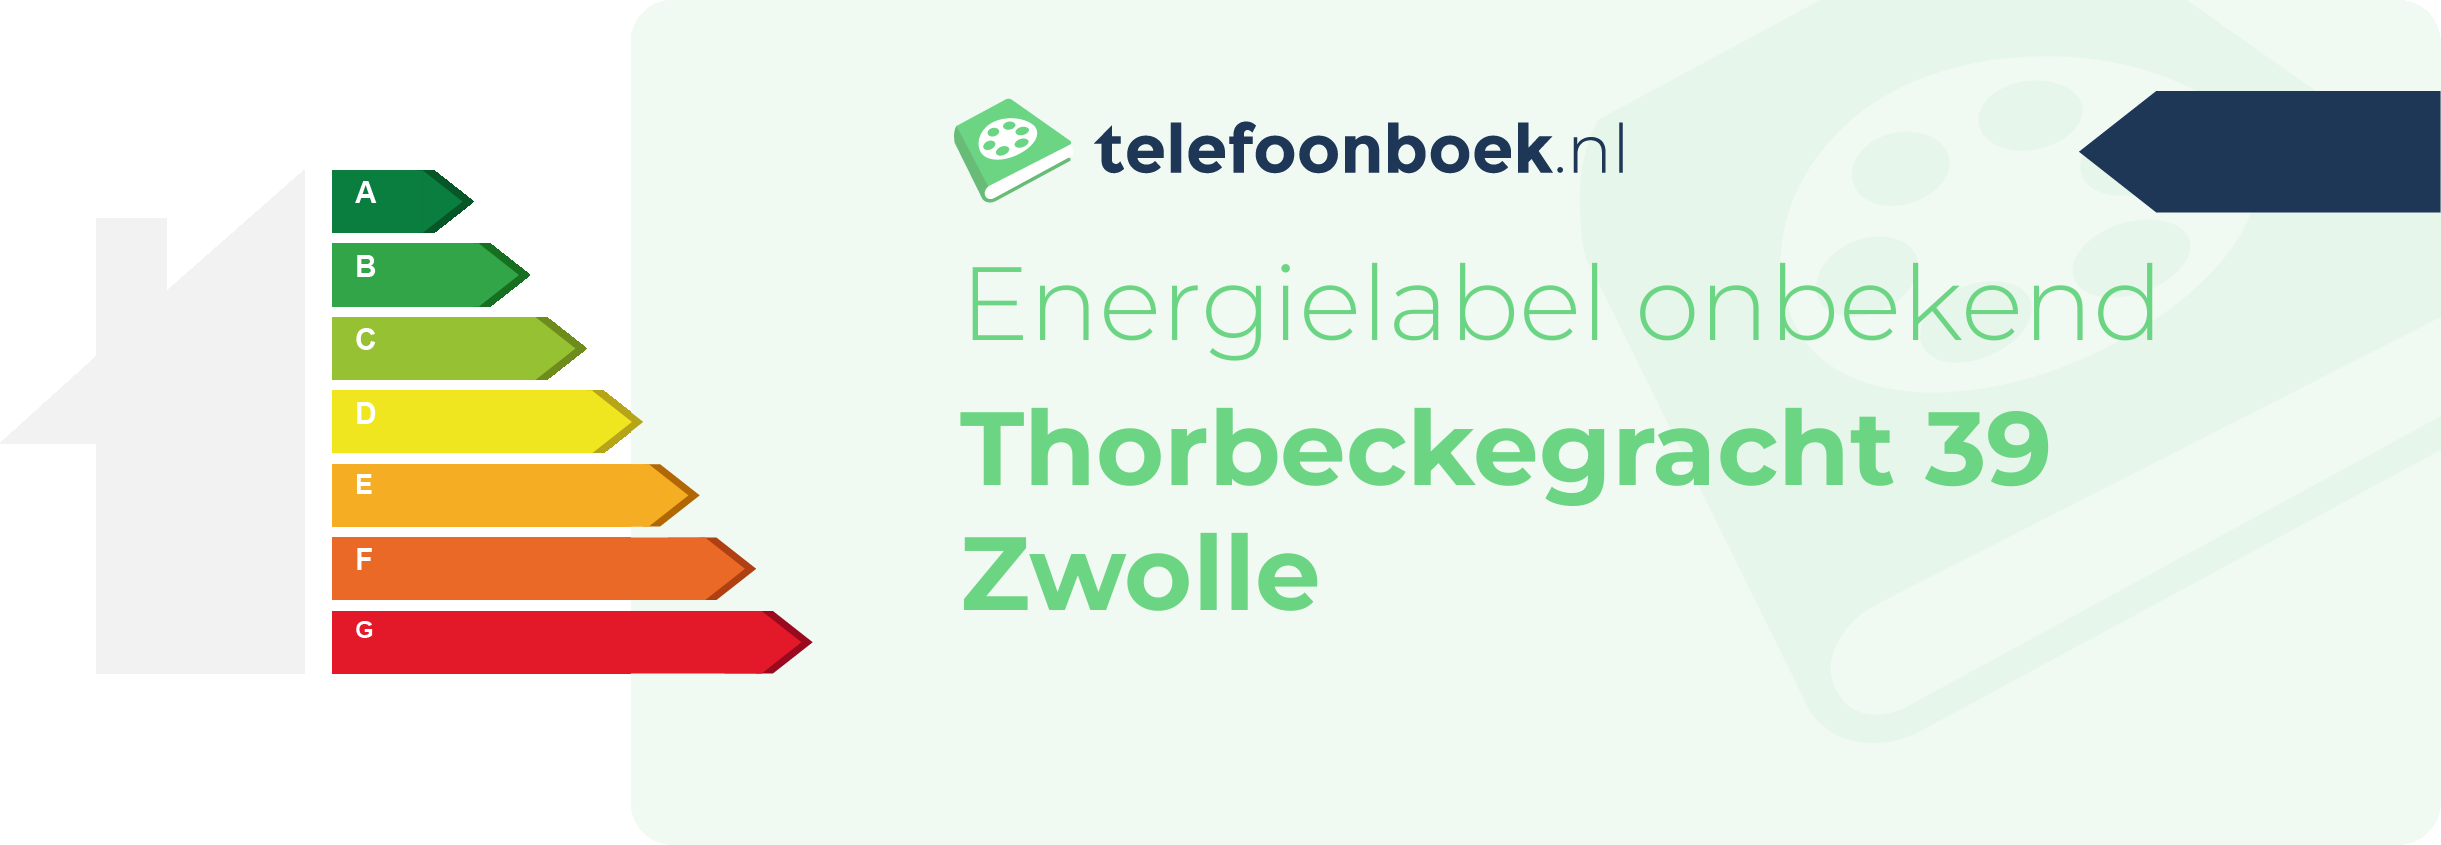 Energielabel Thorbeckegracht 39 Zwolle